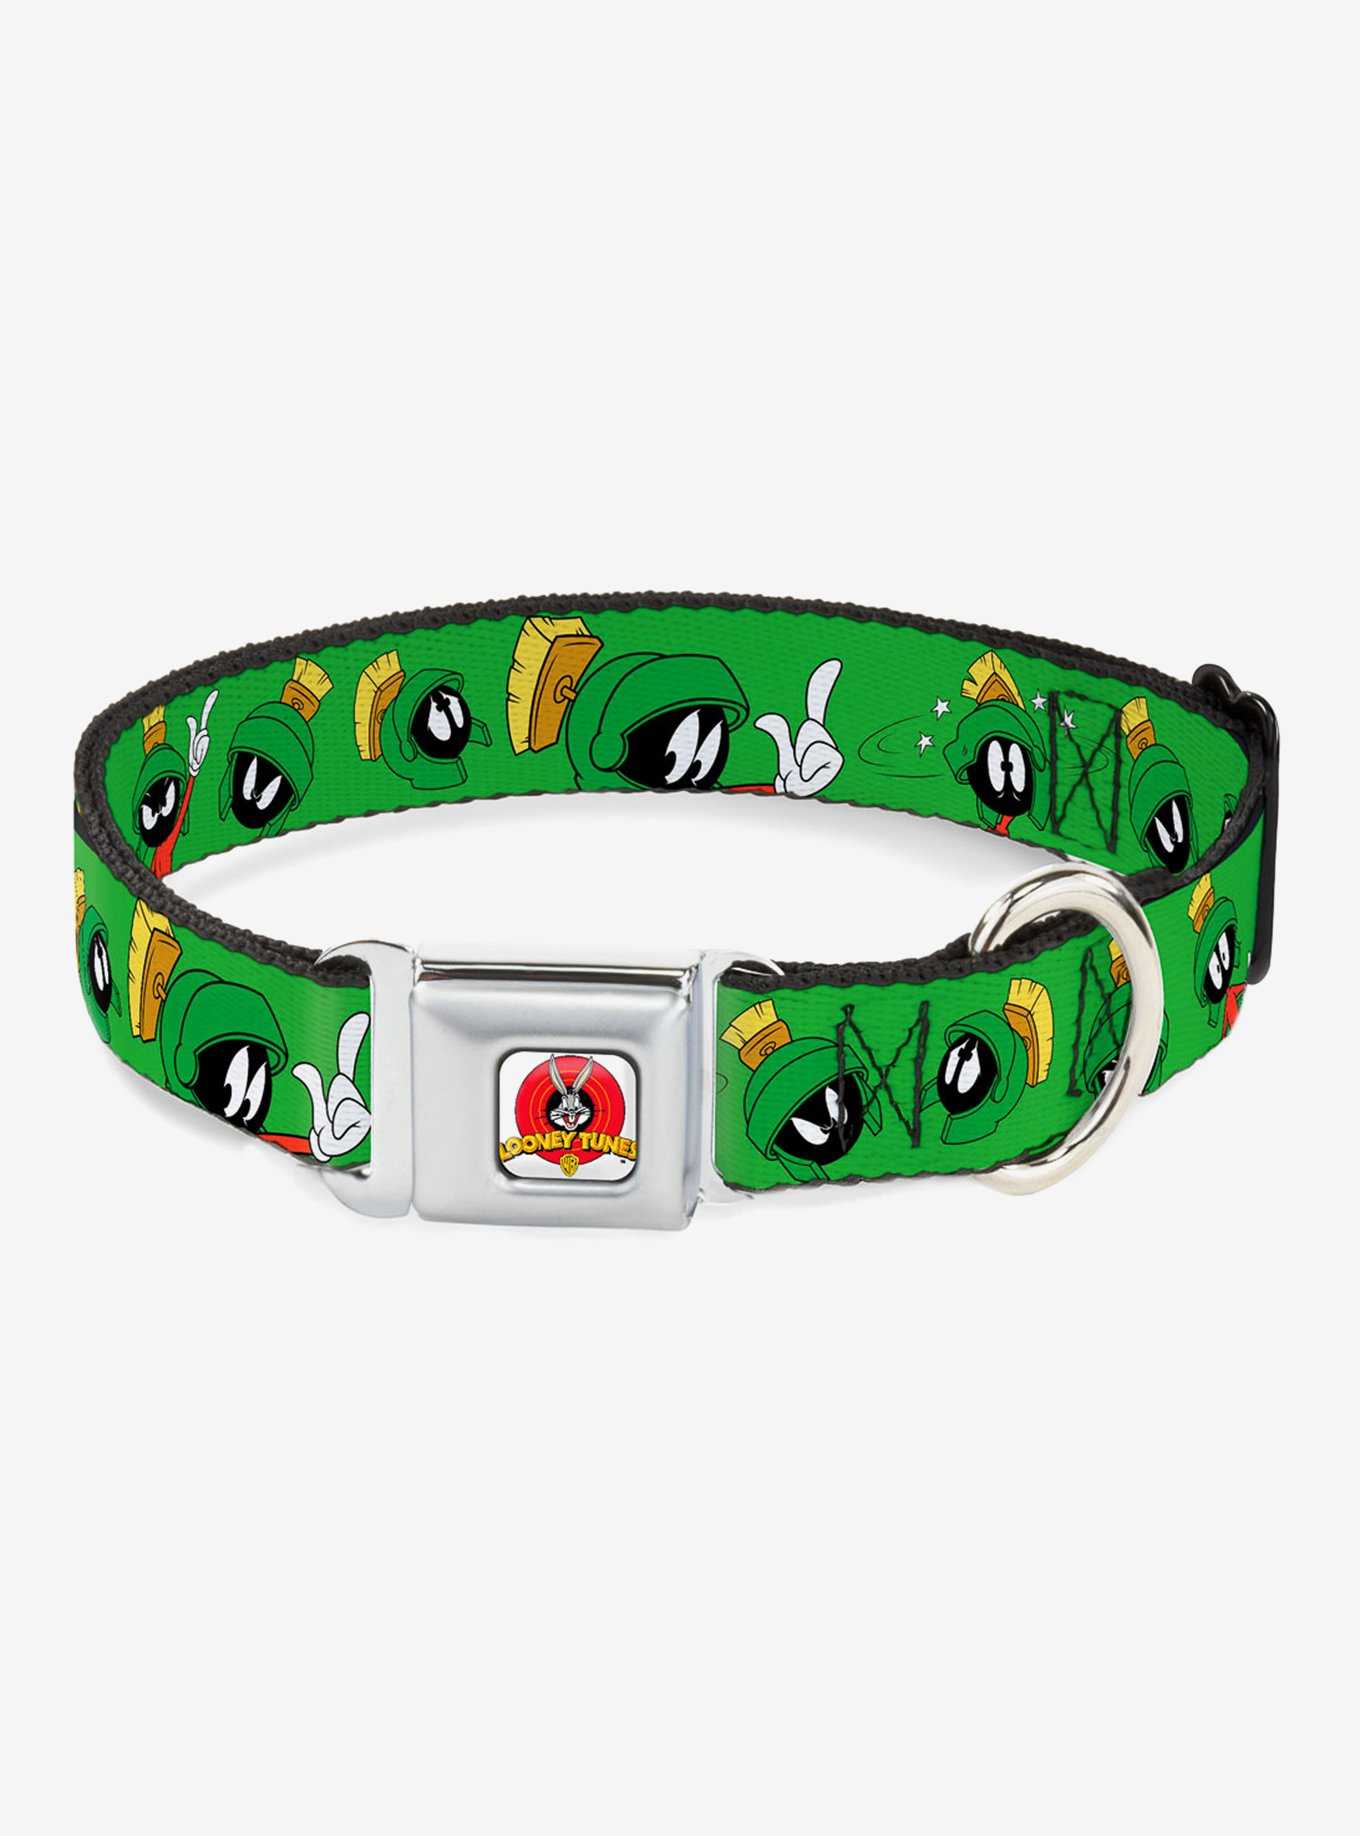 Looney Tunes Marvin The Martian Expressions Green Seatbelt Buckle Dog Collar, , hi-res